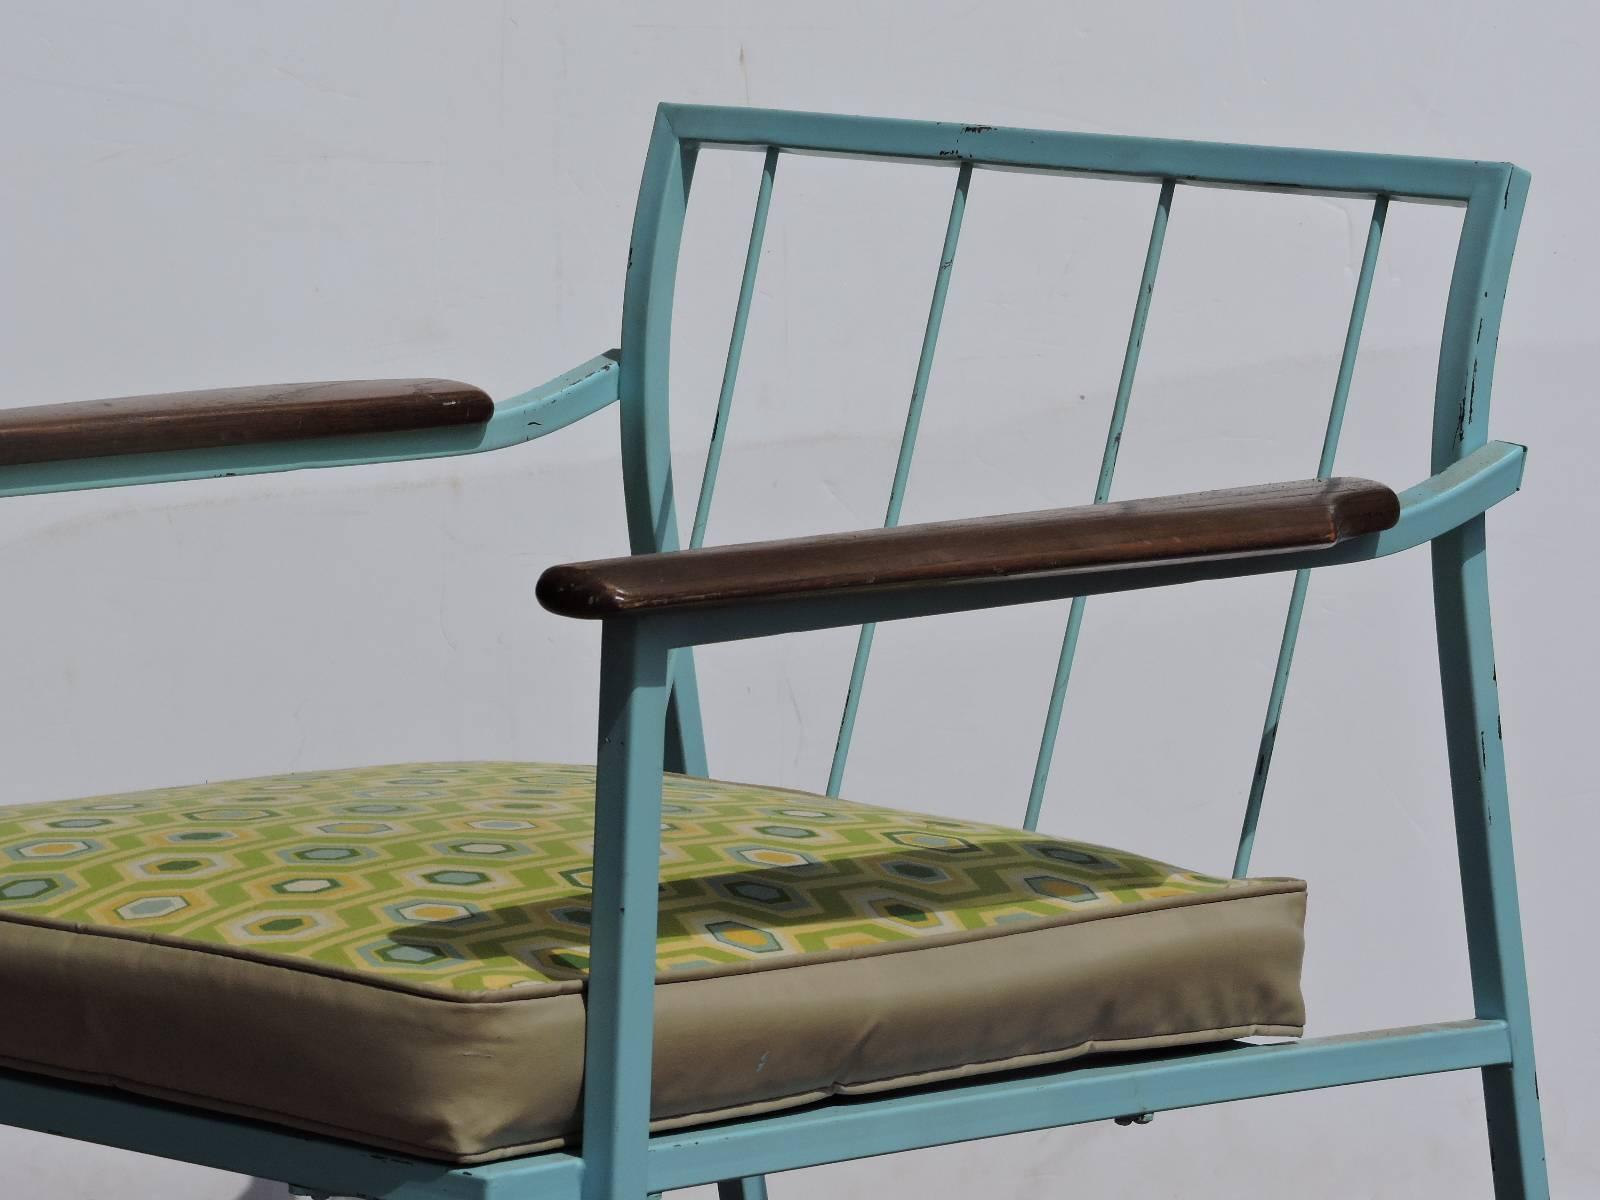 Pair of mid-20th century modernist sleek exaggerated square hollow stock iron frame armchairs in nicely aged original robins egg blue painted surface and  sculpted grained wood armrests. For porch patio or interior. Great looking chairs,